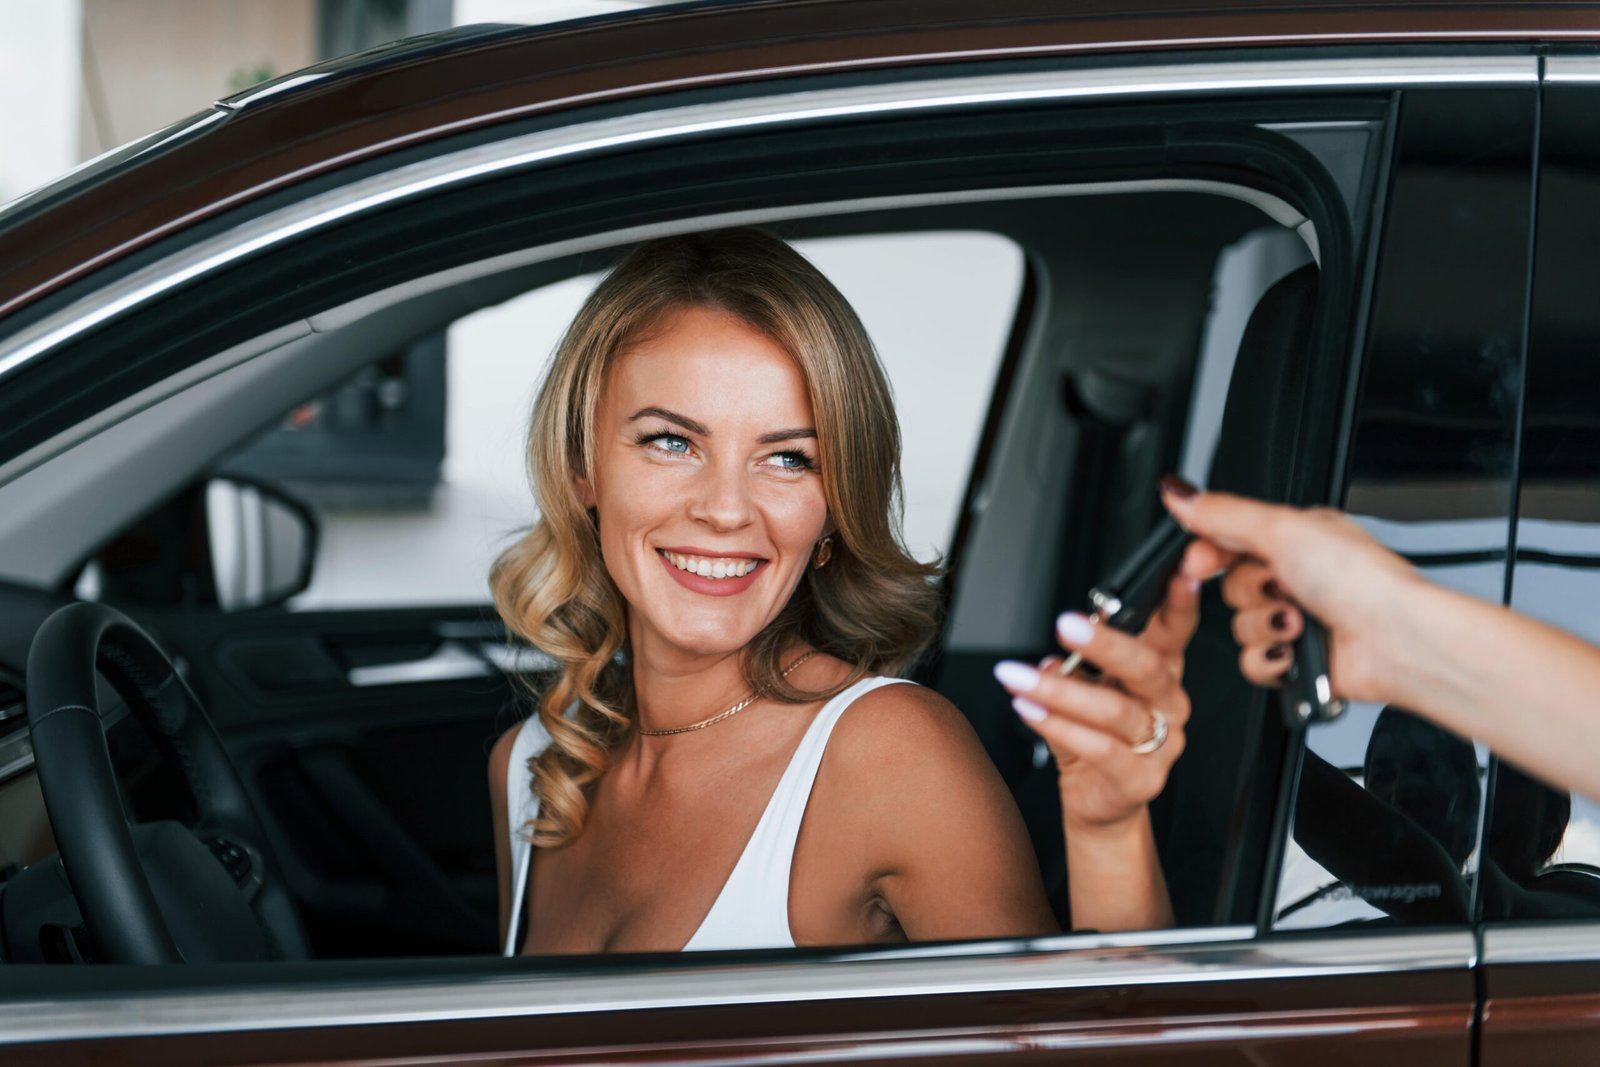 holding-car-keys-woman-in-formal-clothes-is-indoo-2021-12-27-15-52-03-utc-min-scaled.jpg